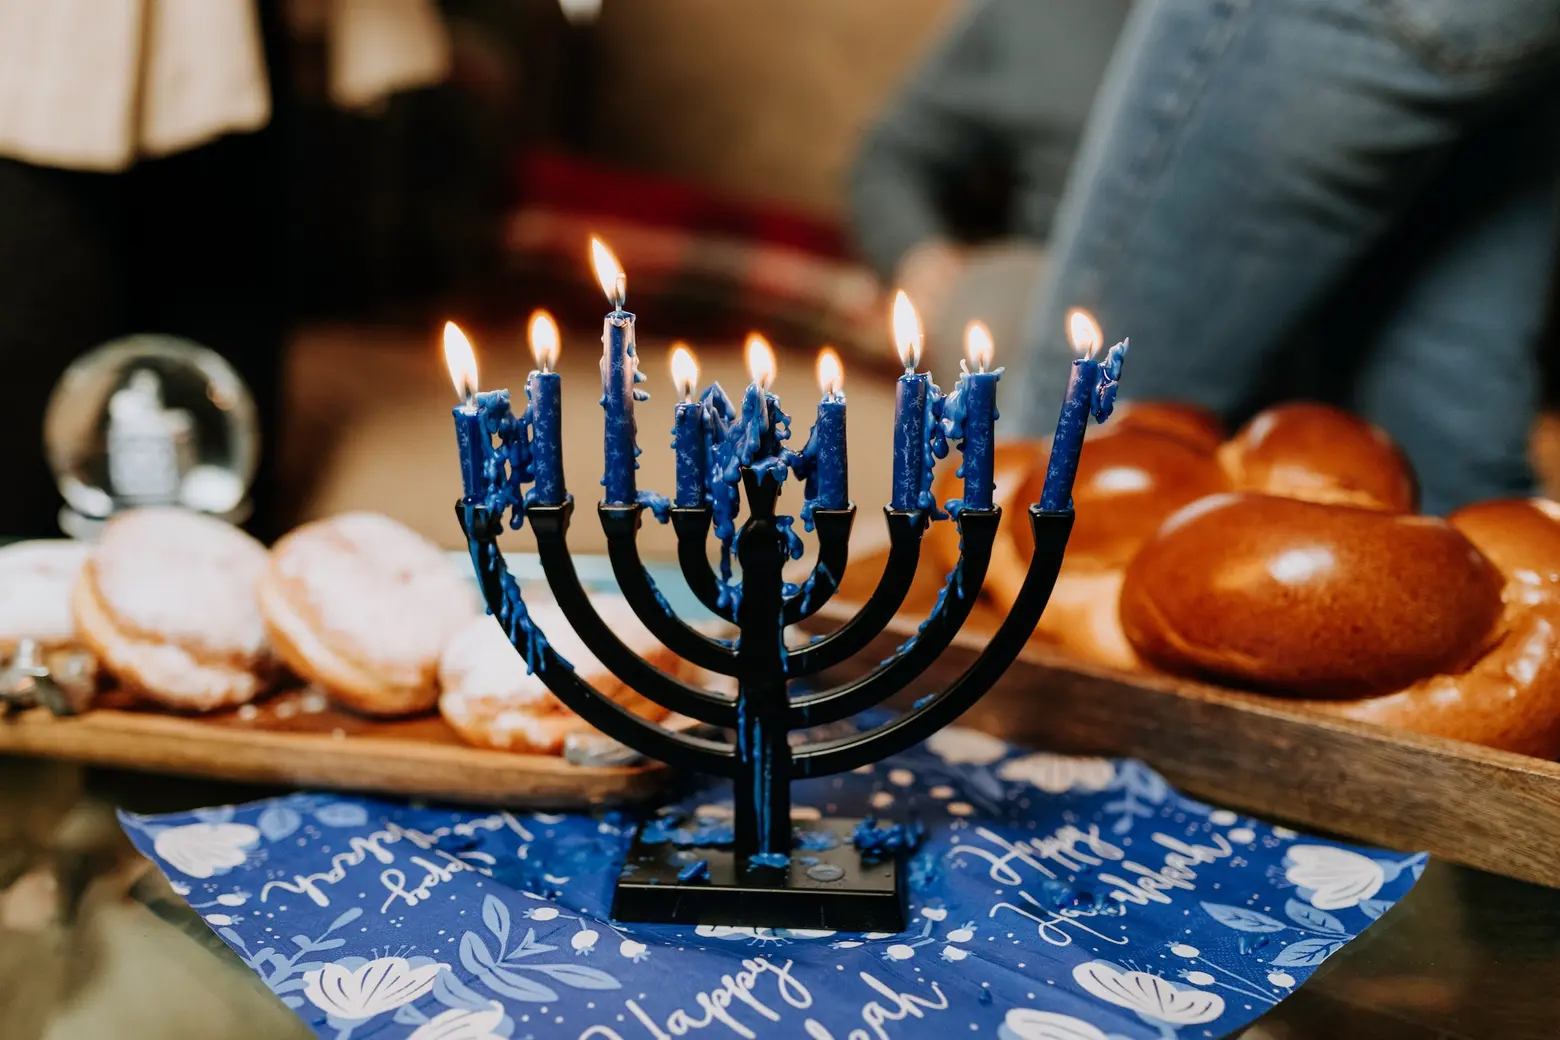 Where to order Hanukkah takeout in NYC